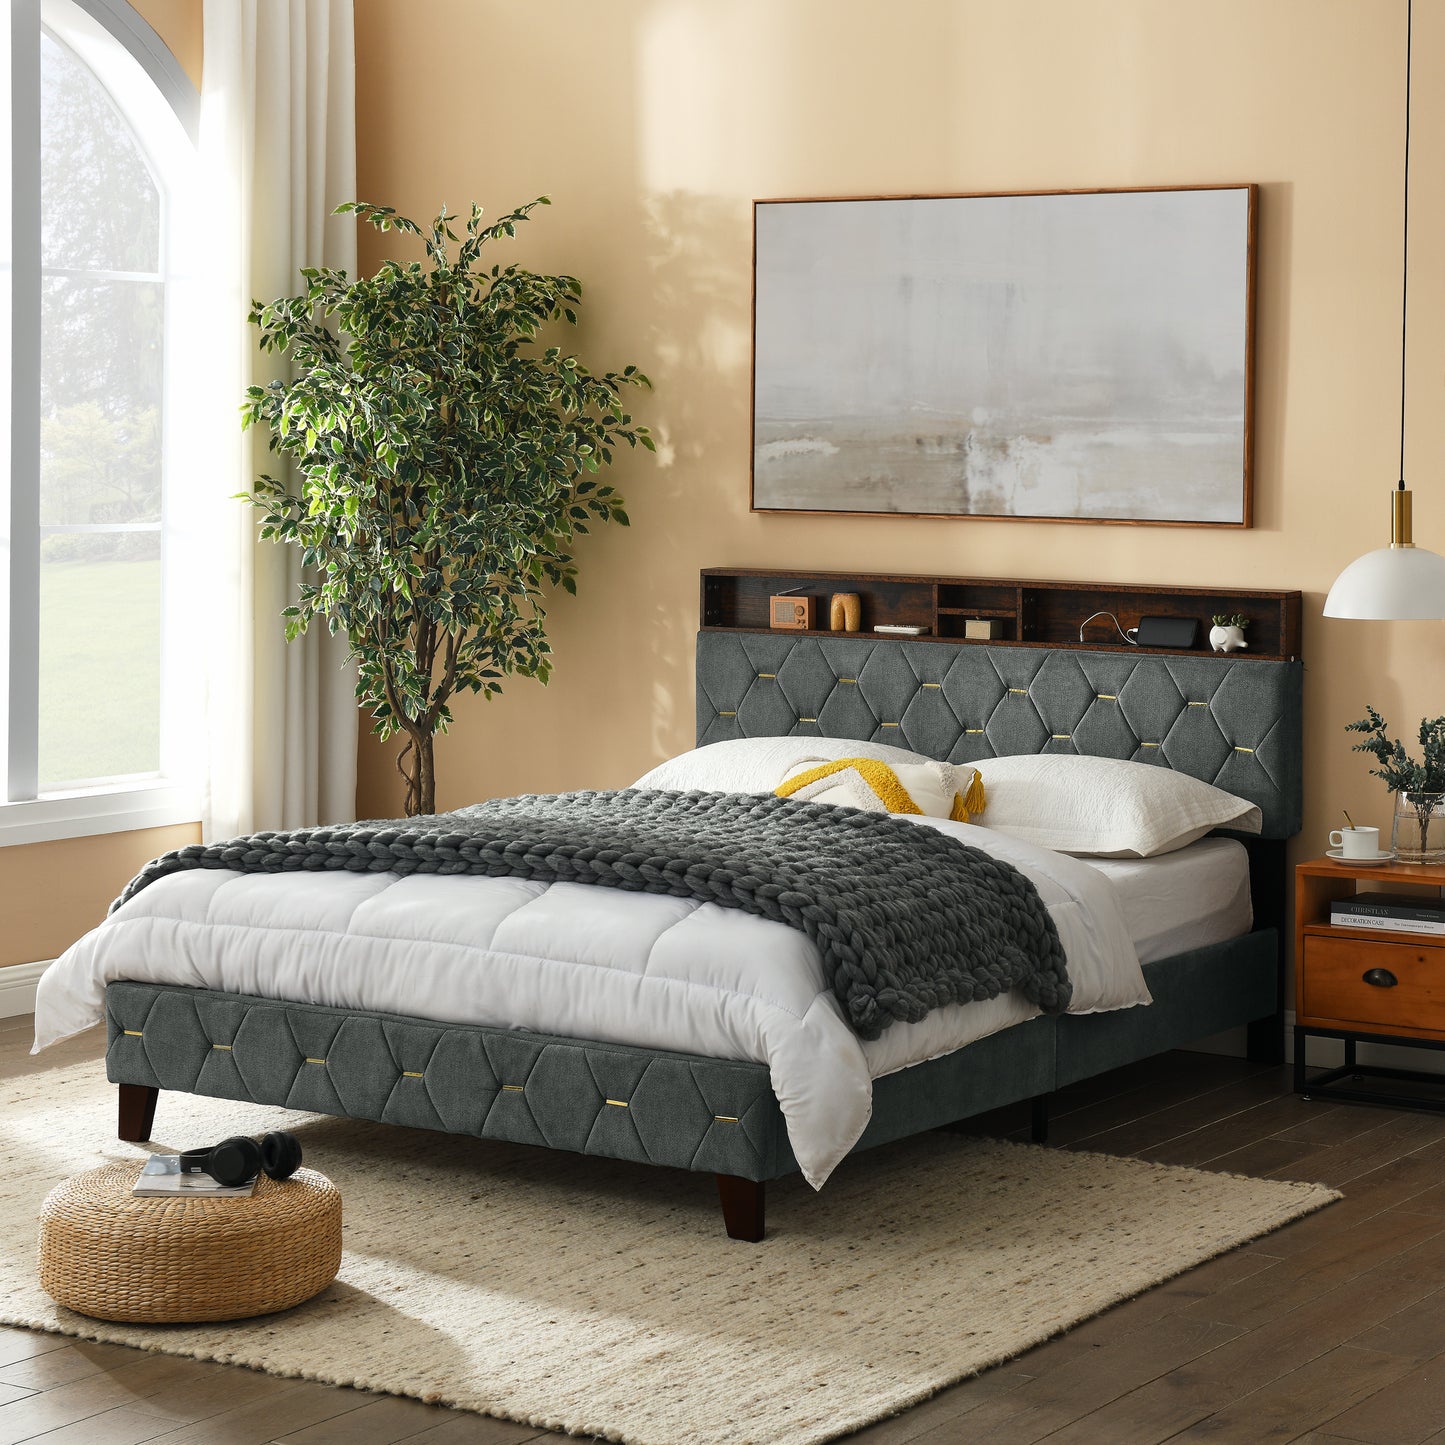 Queen Size Bed Frame, Shelf Upholstered Headboard, Platform Bed with Outlet & USB Ports, Wood Legs, No Box Spring Needed, Easy Assembly, Grey